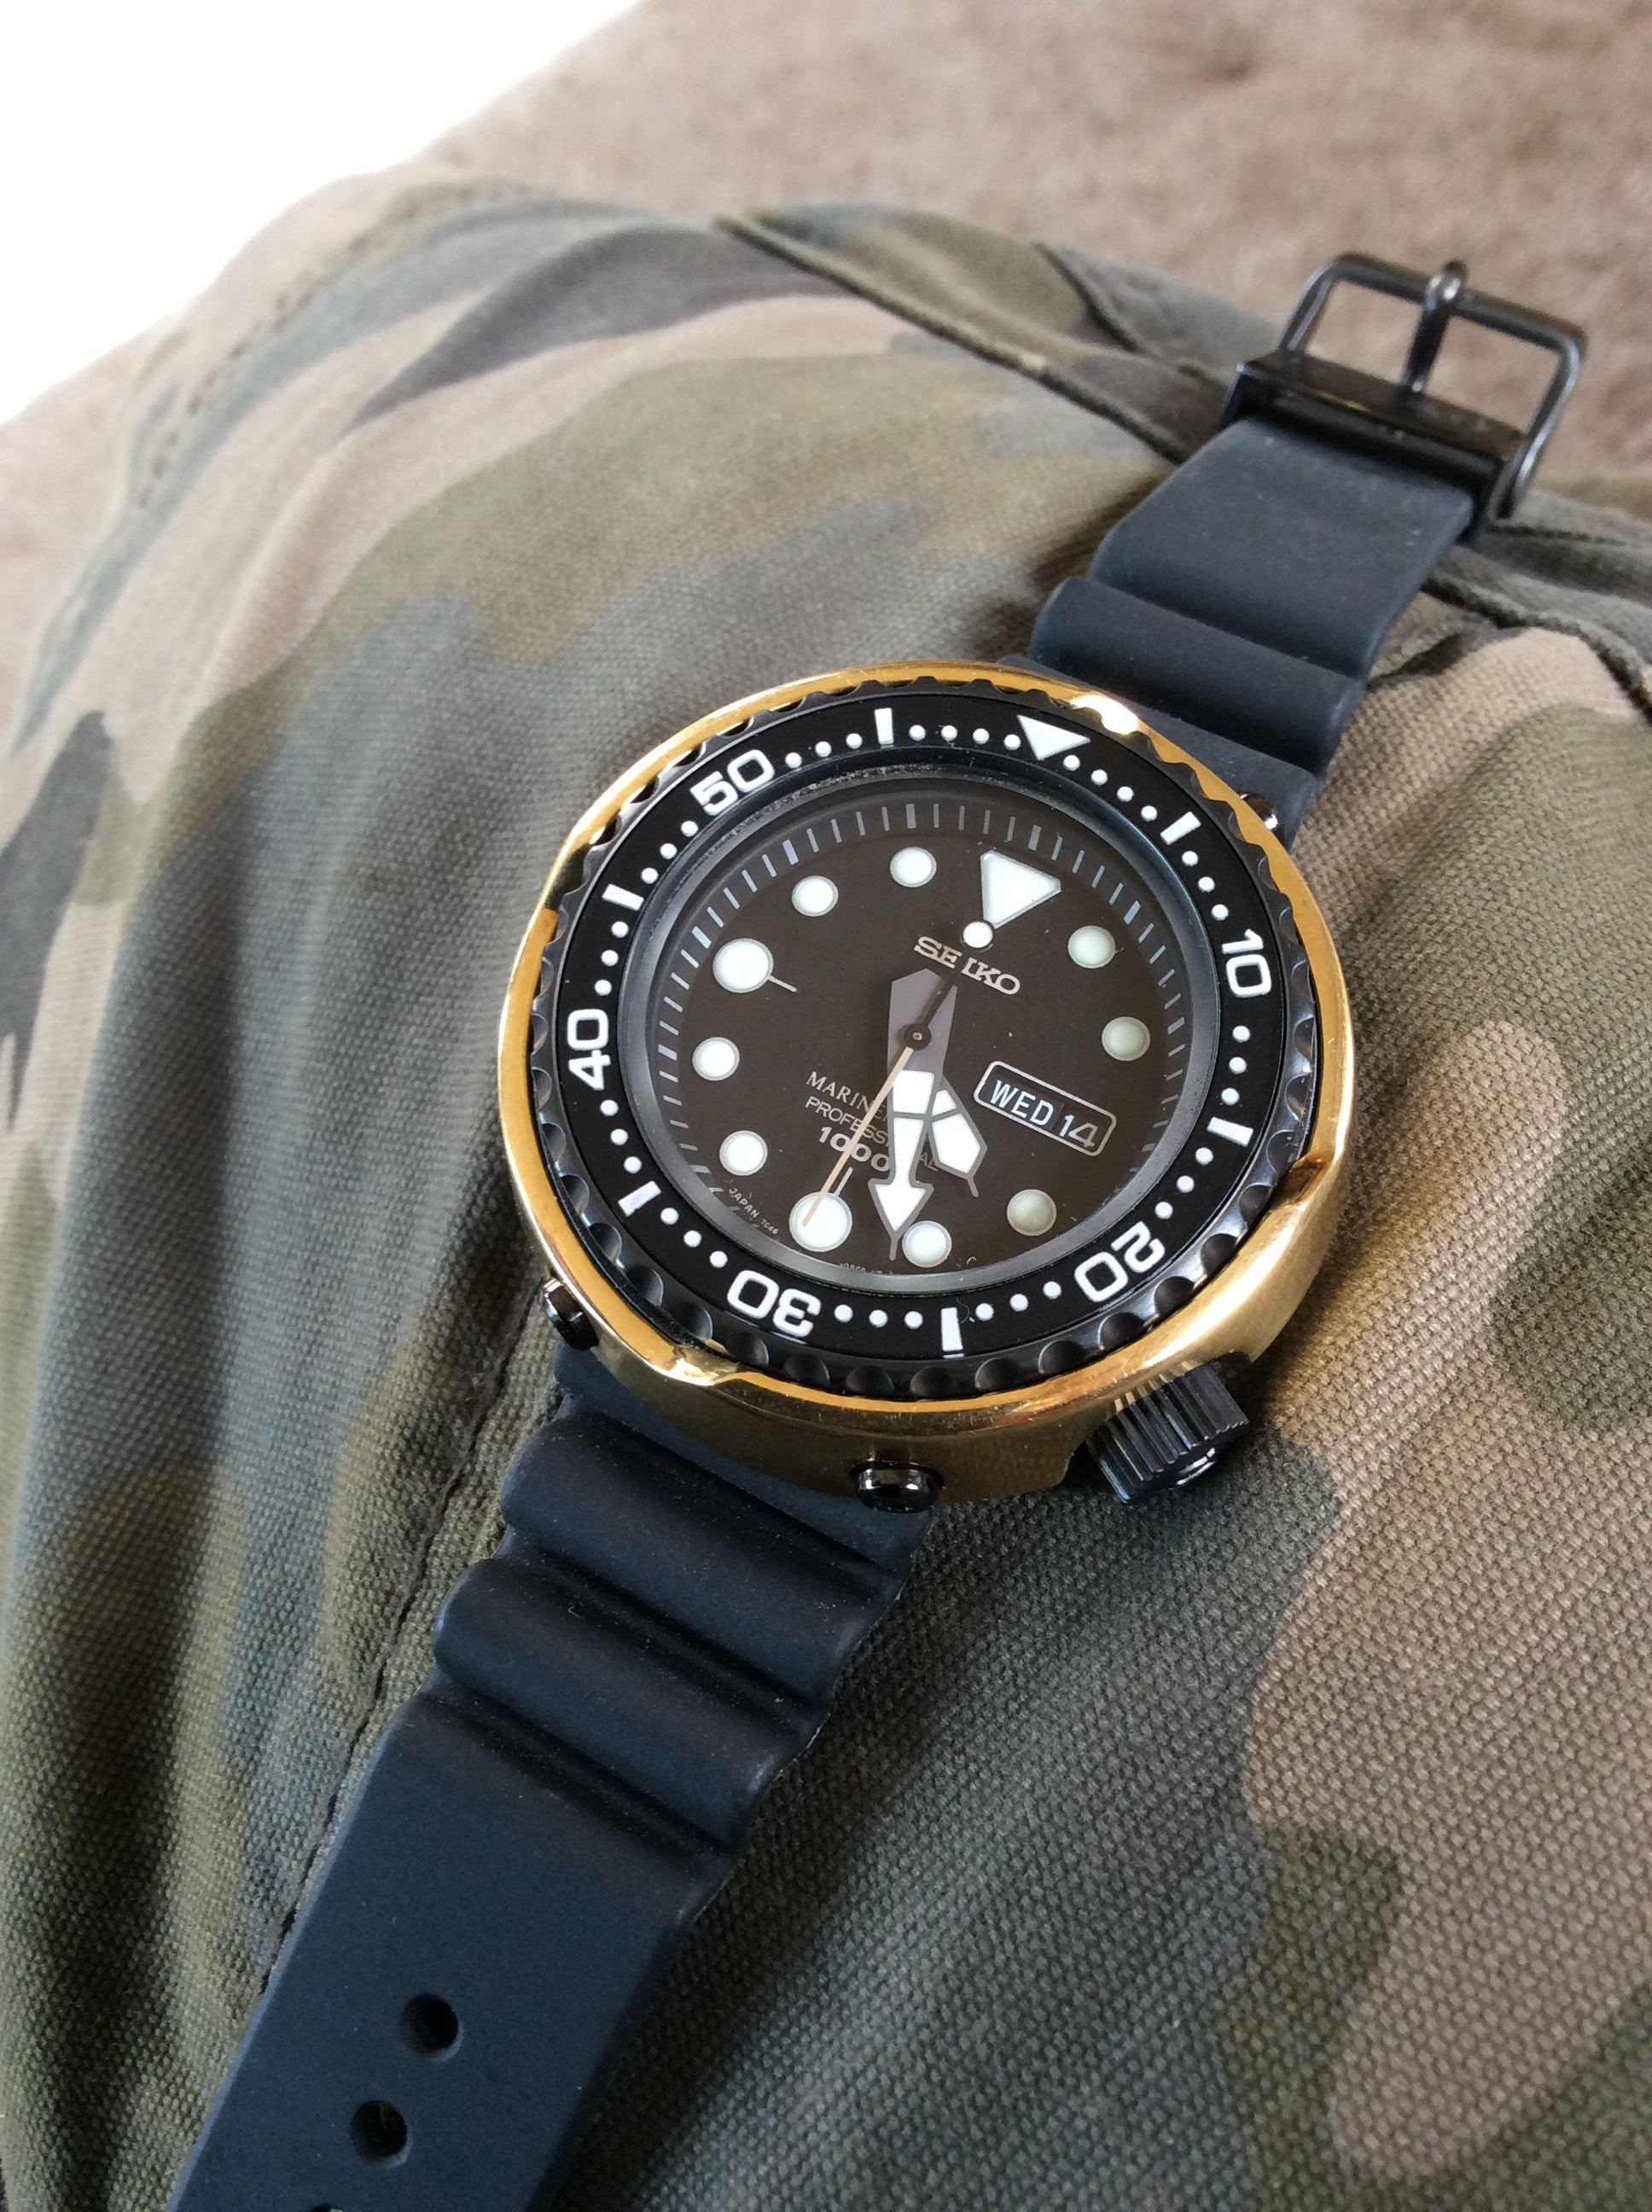 Take a look at the brass shroud, on my tuna! | WatchUSeek Watch Forums